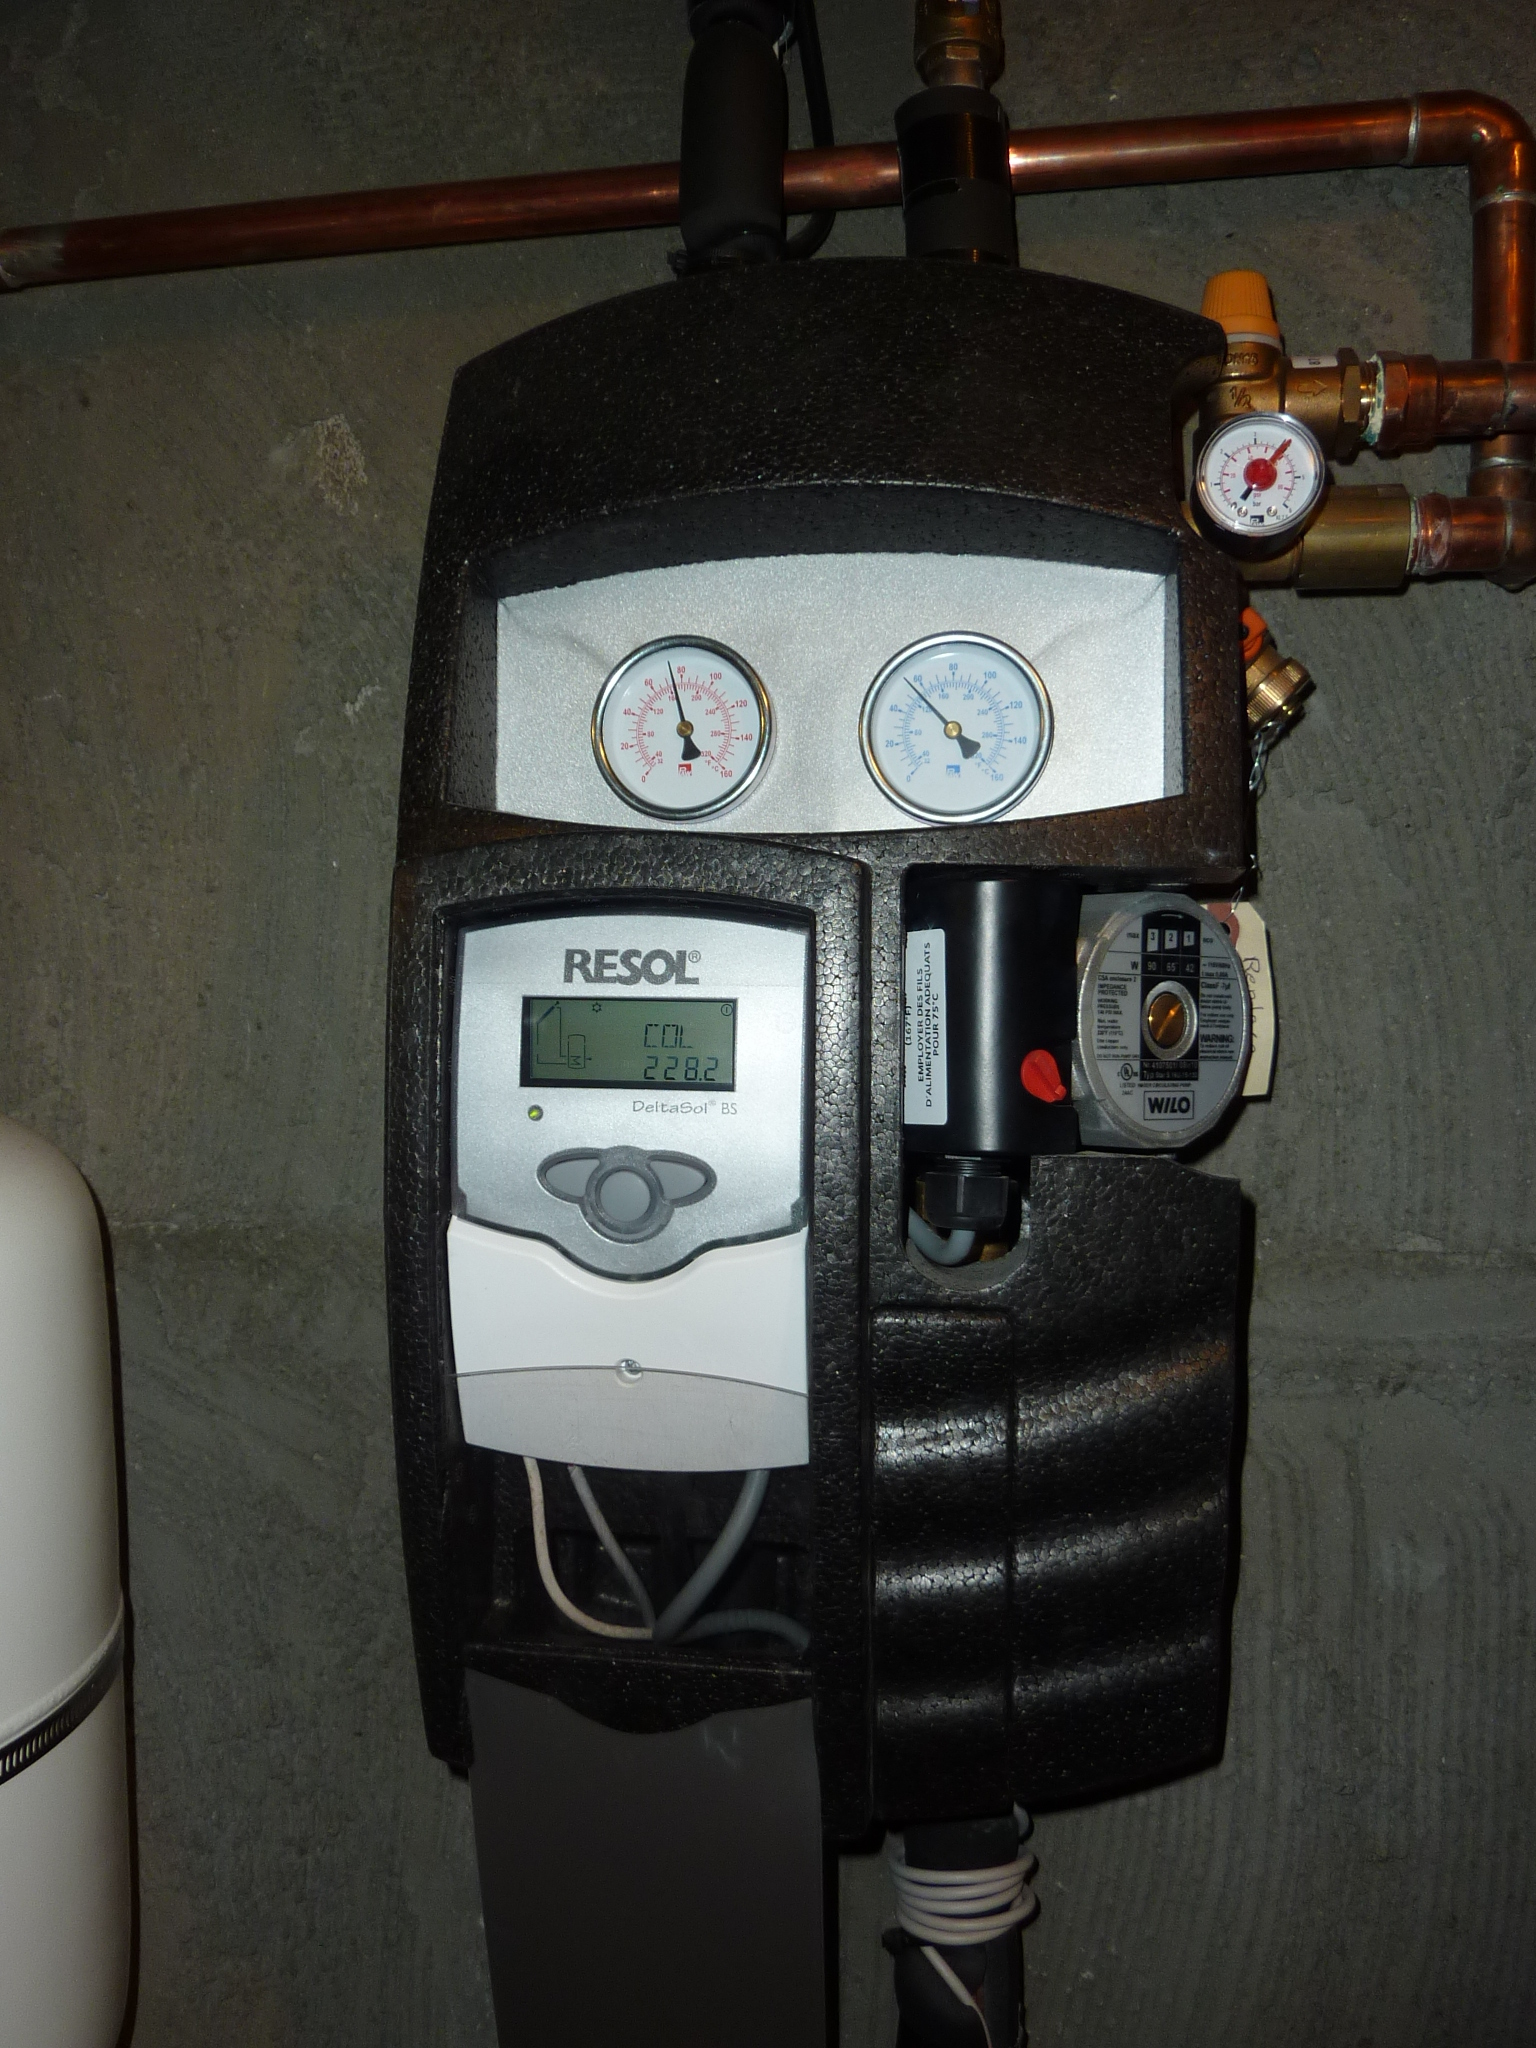 The pump monitors the temperature at the collector and in the tank. When more heat is needed, it turns on to circulate the glycol.